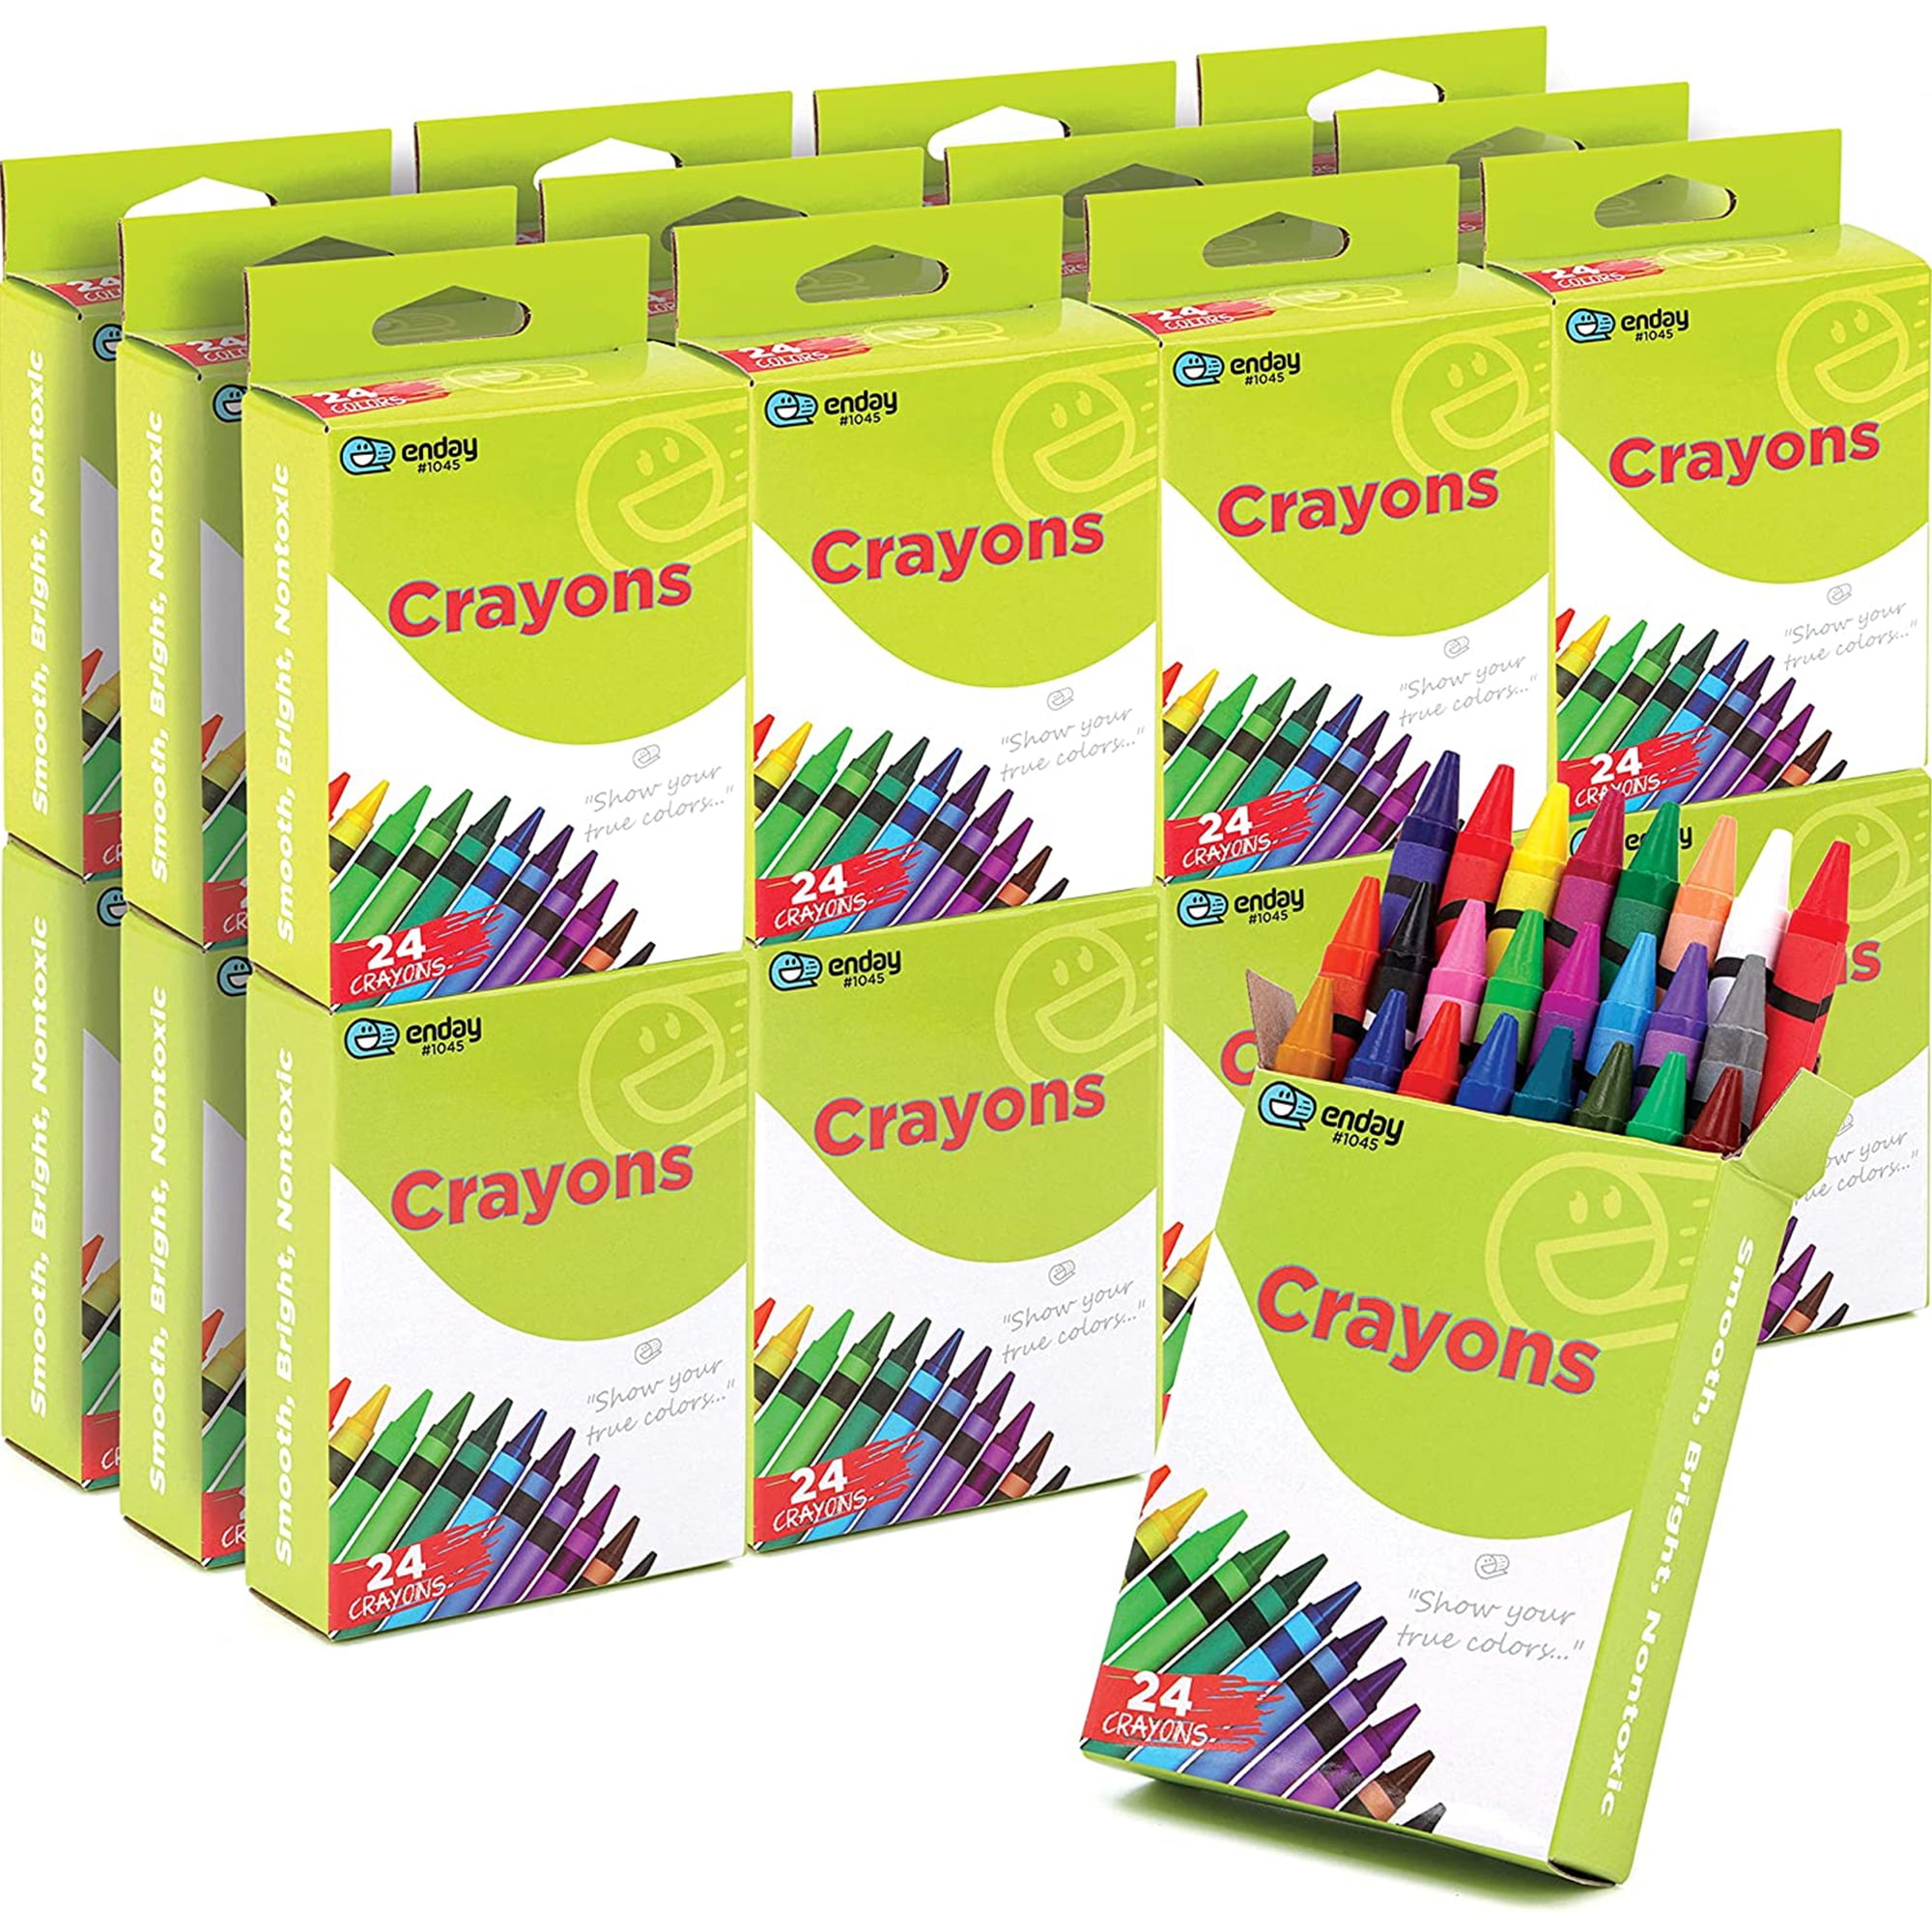 Star PARTY FAVOR Crayons // Crayon Goodie Bag // Personalized